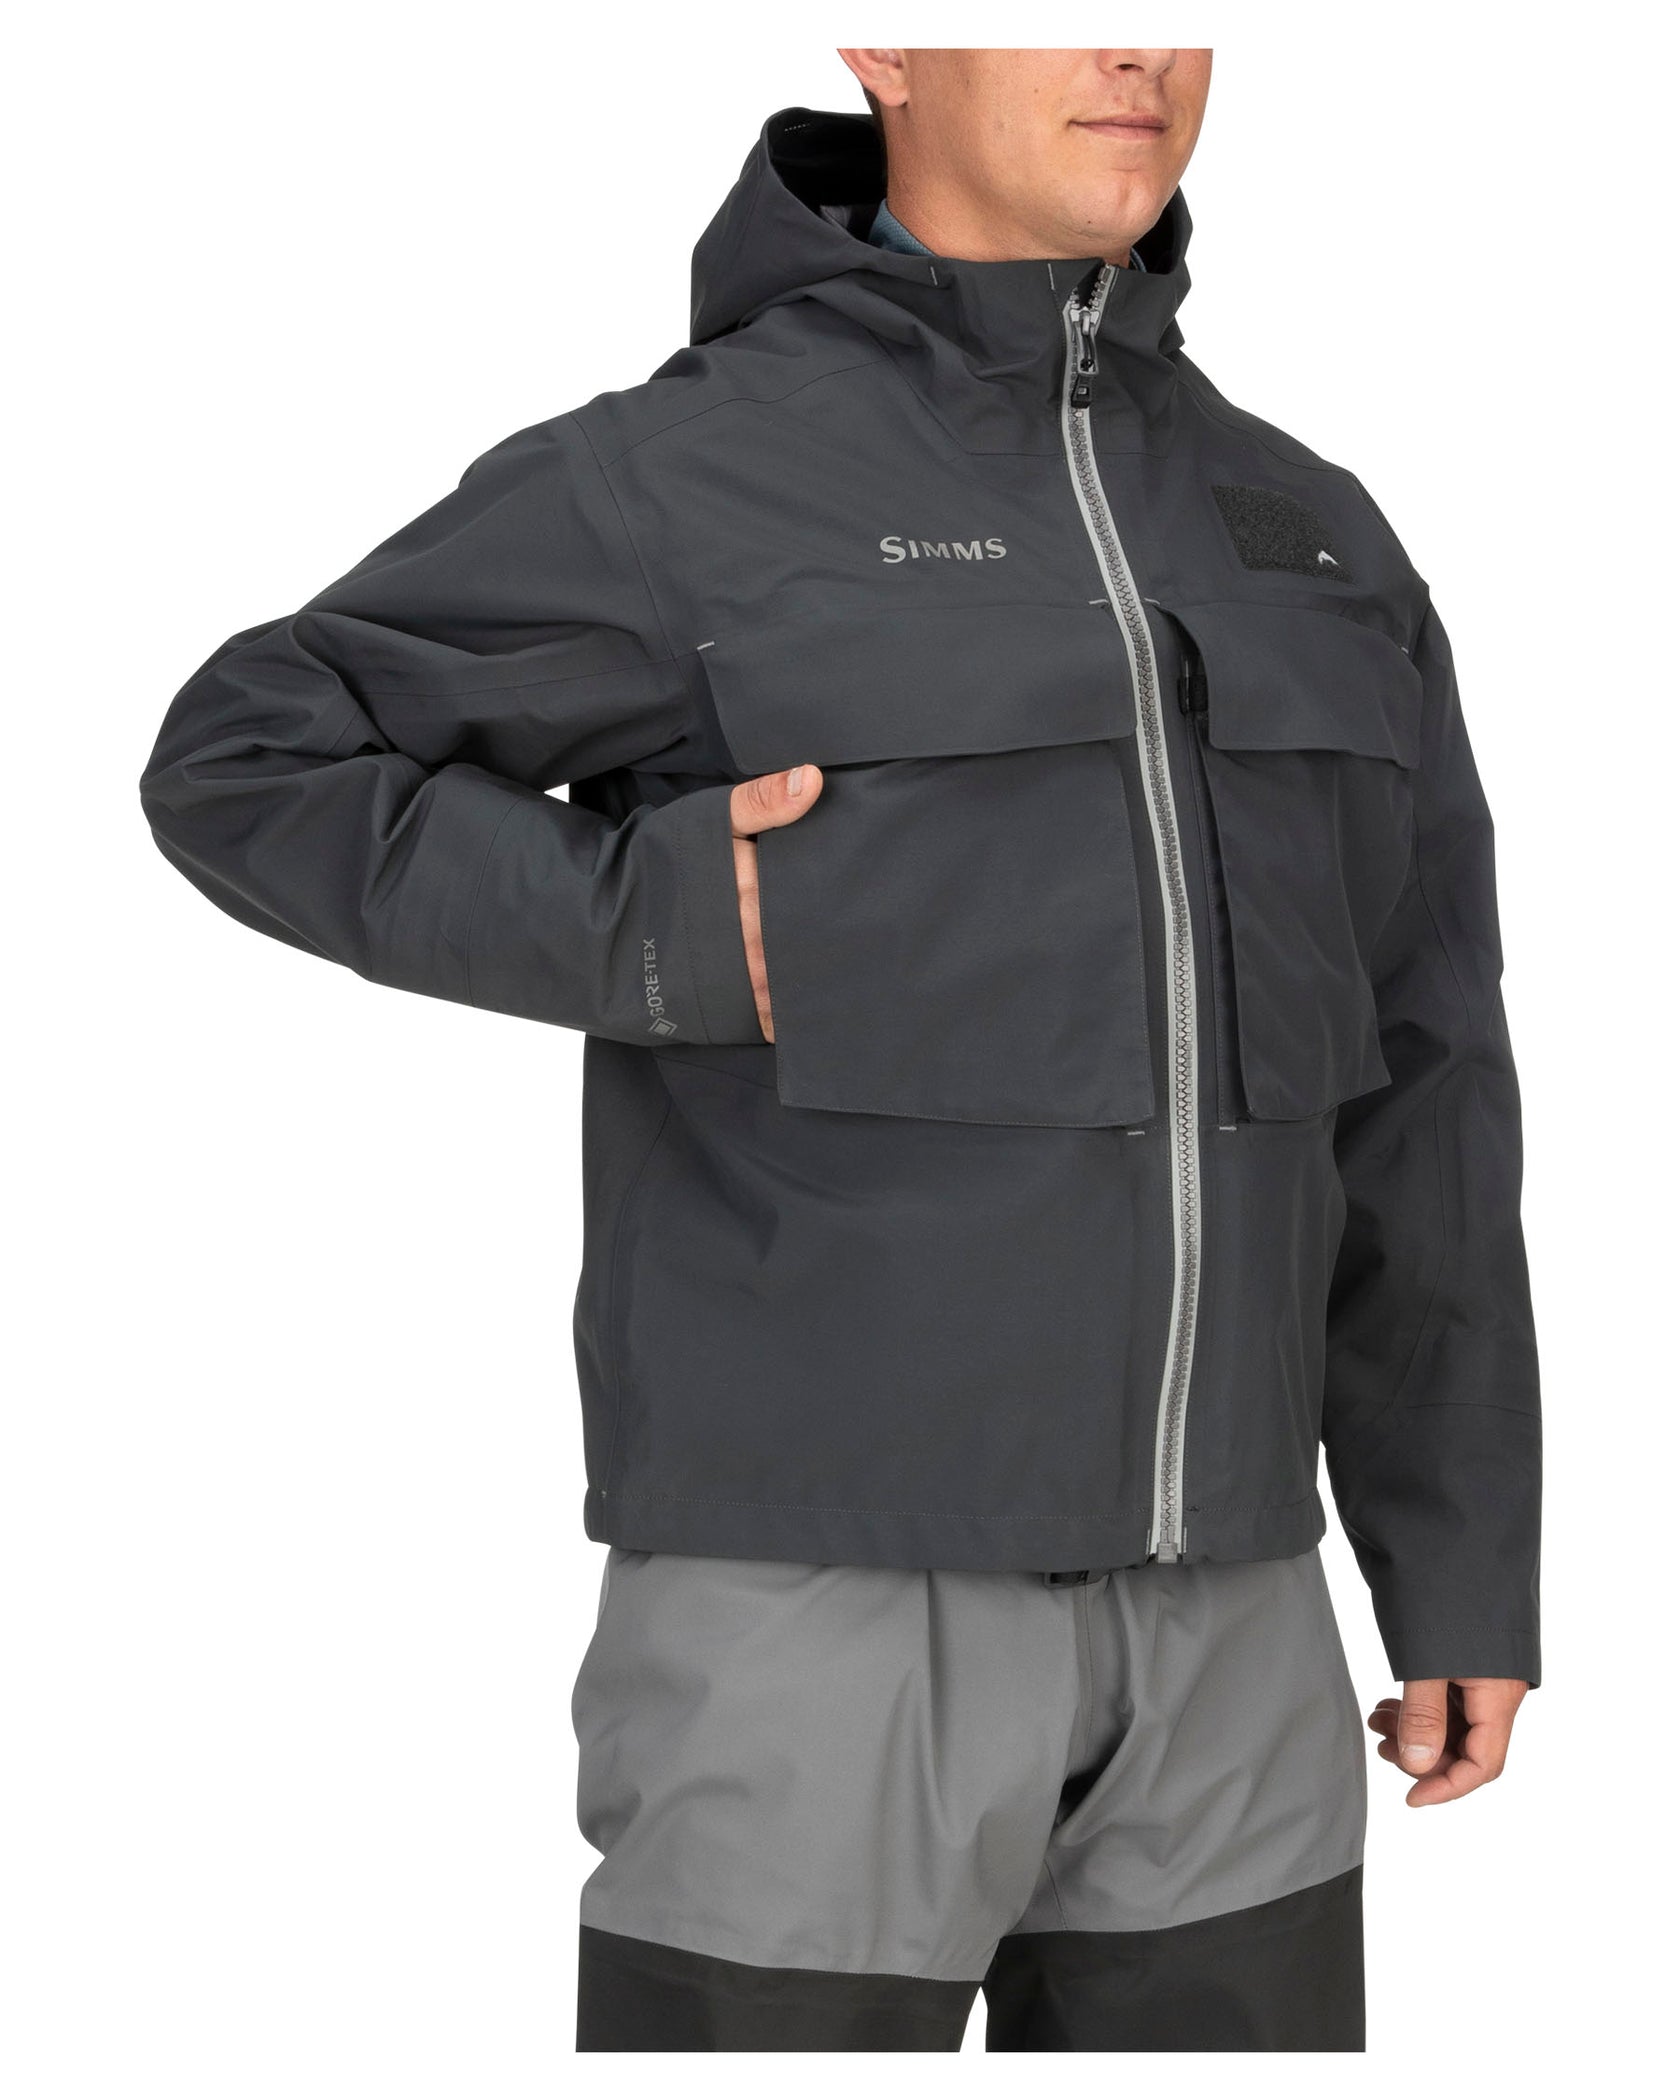 SIMMS GUIDE CLASSIC WADING JACKET